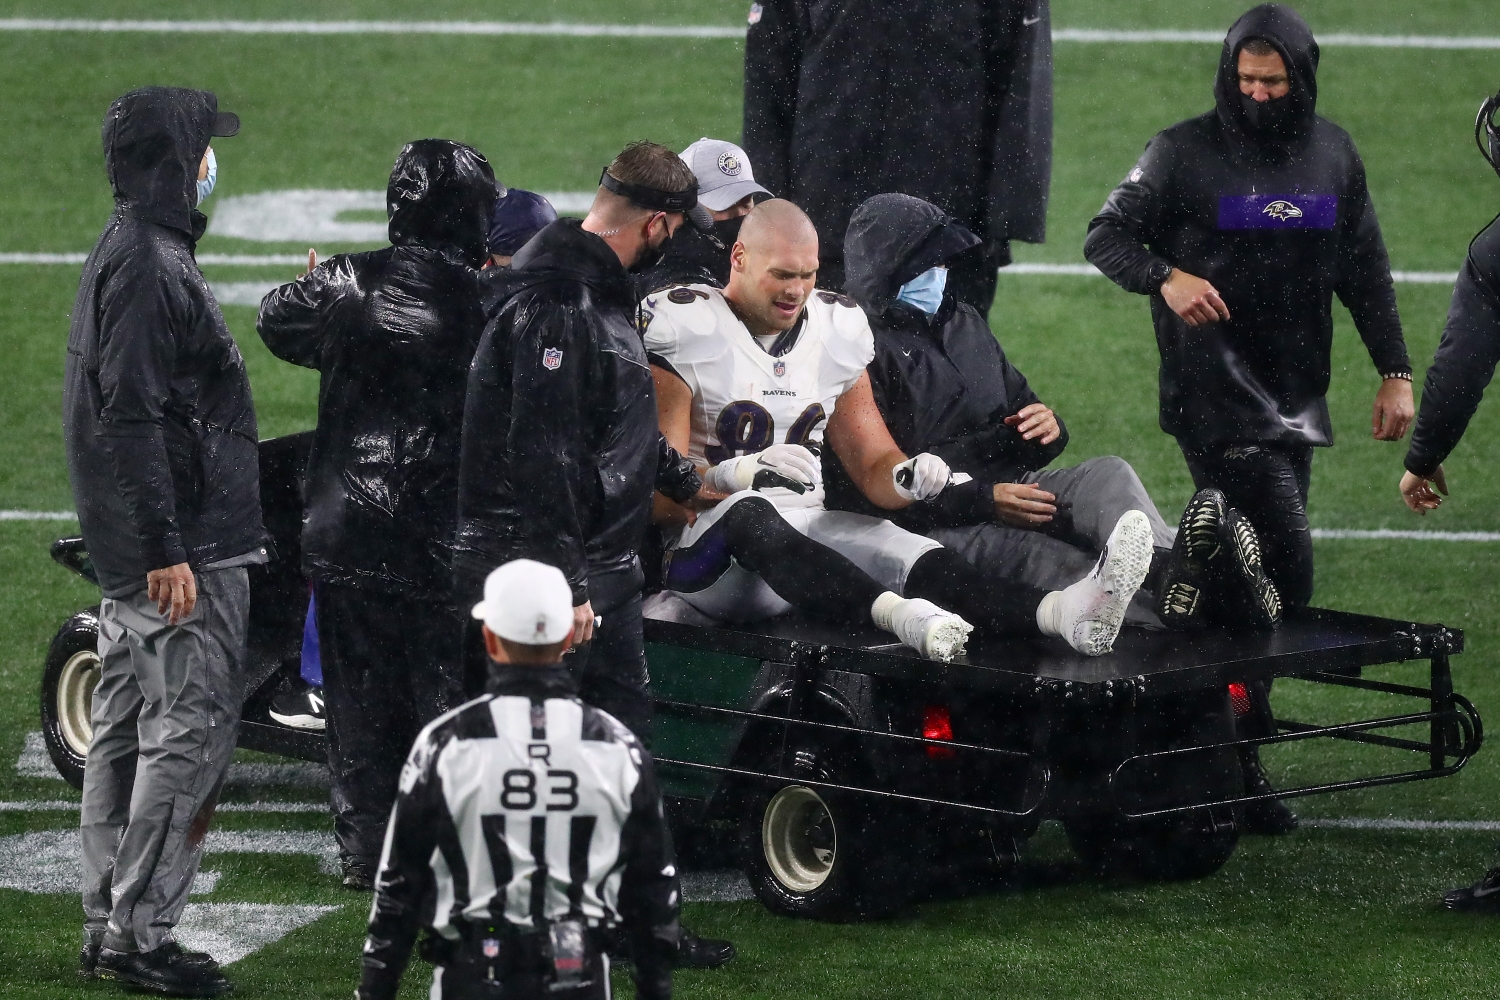 Ravens tight end Nick Boyle suffered a season-ending injury against the Patriots.